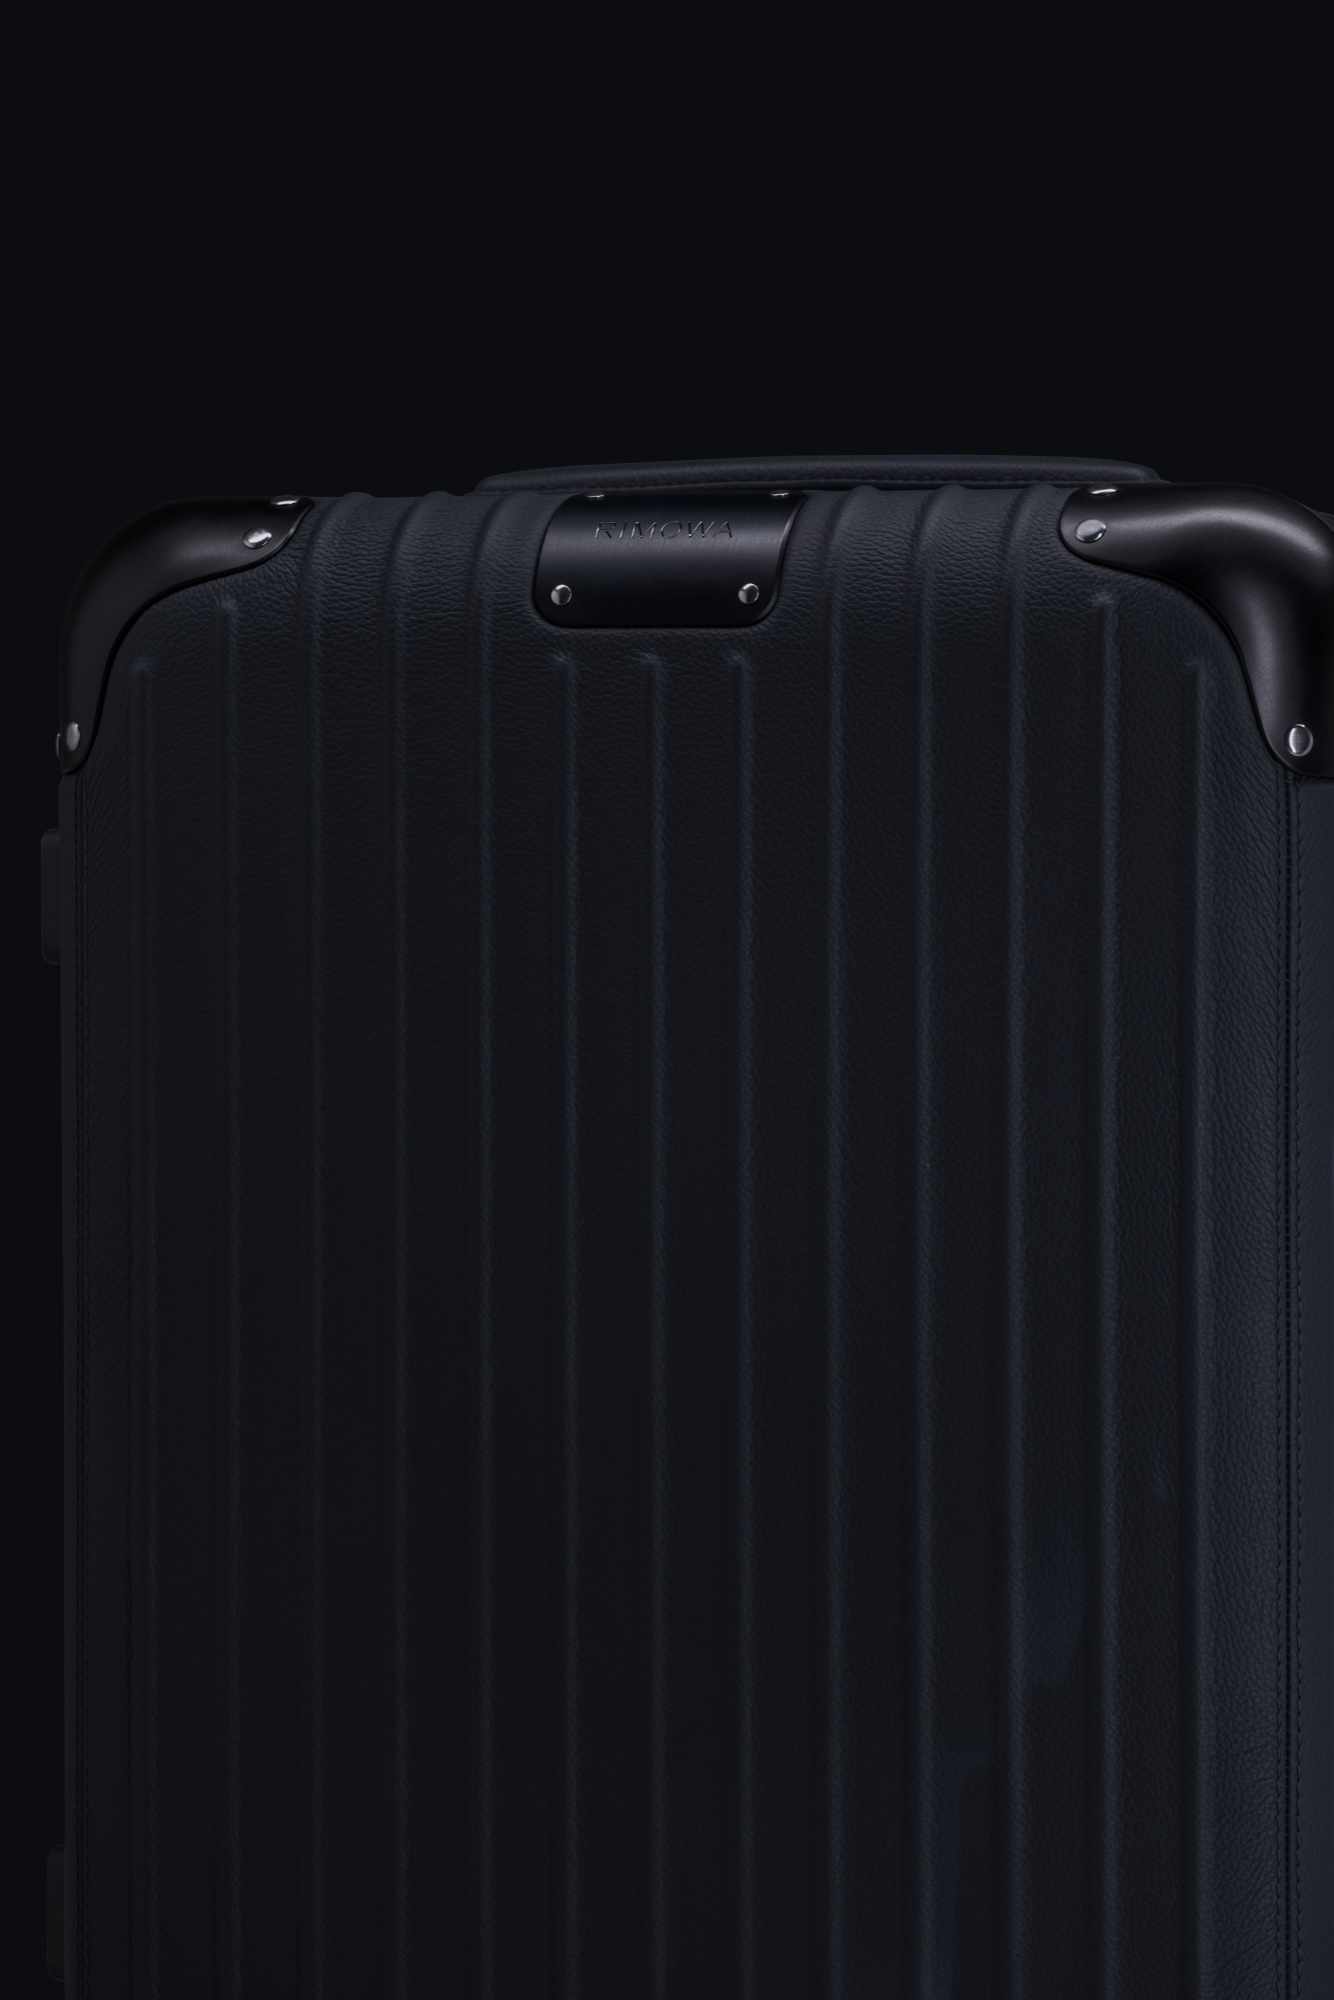 RIMOWA's $3,300 leather-wrapped Distinct Cabin suitcase collection